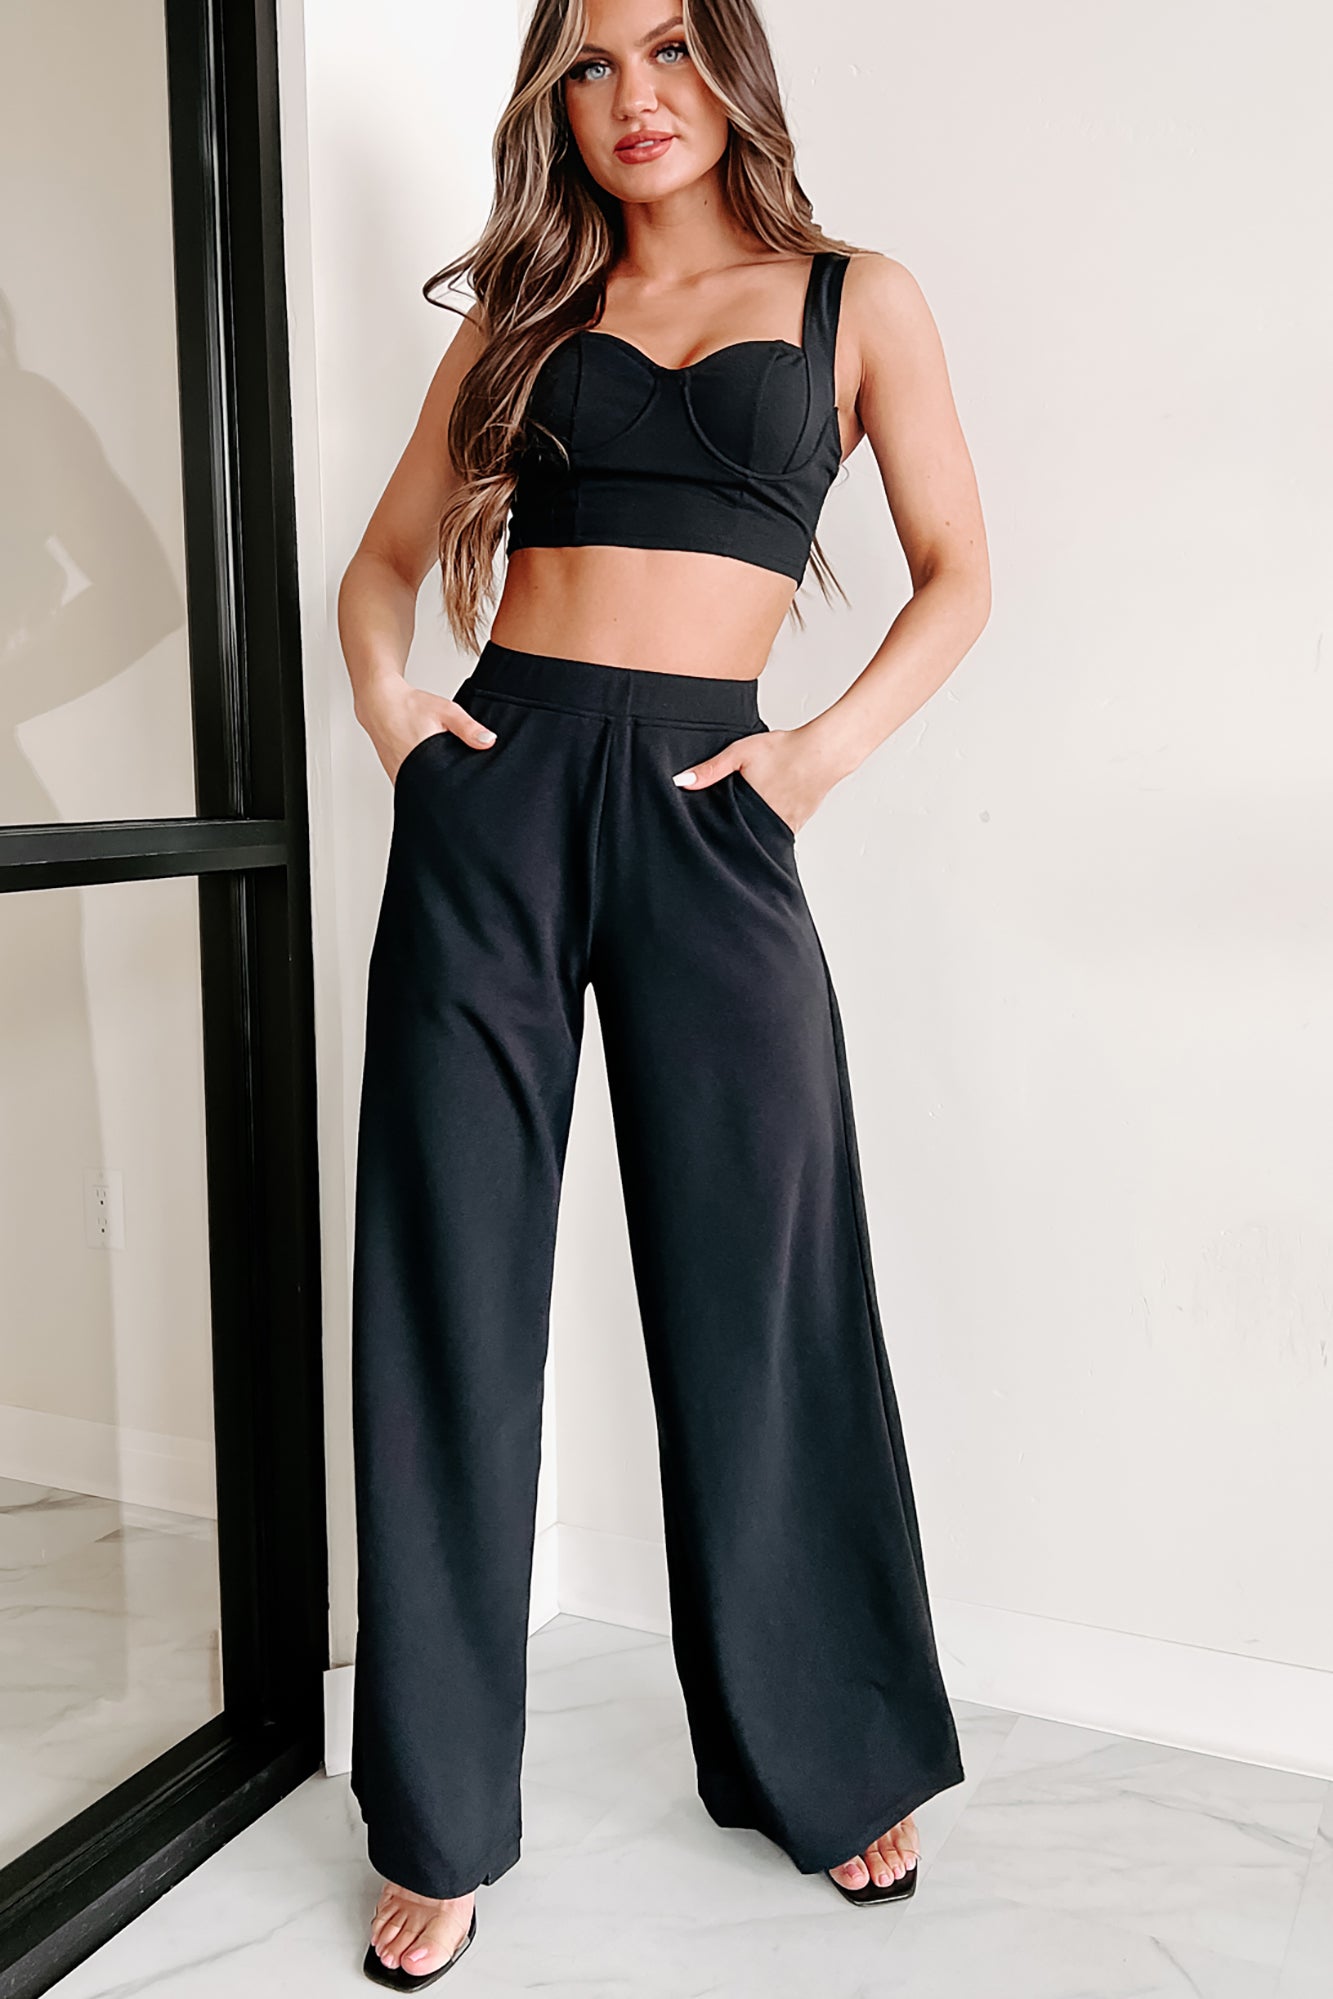 Women's Two Piece Pant Set - Bustier Style Crop Top / Flared Pants